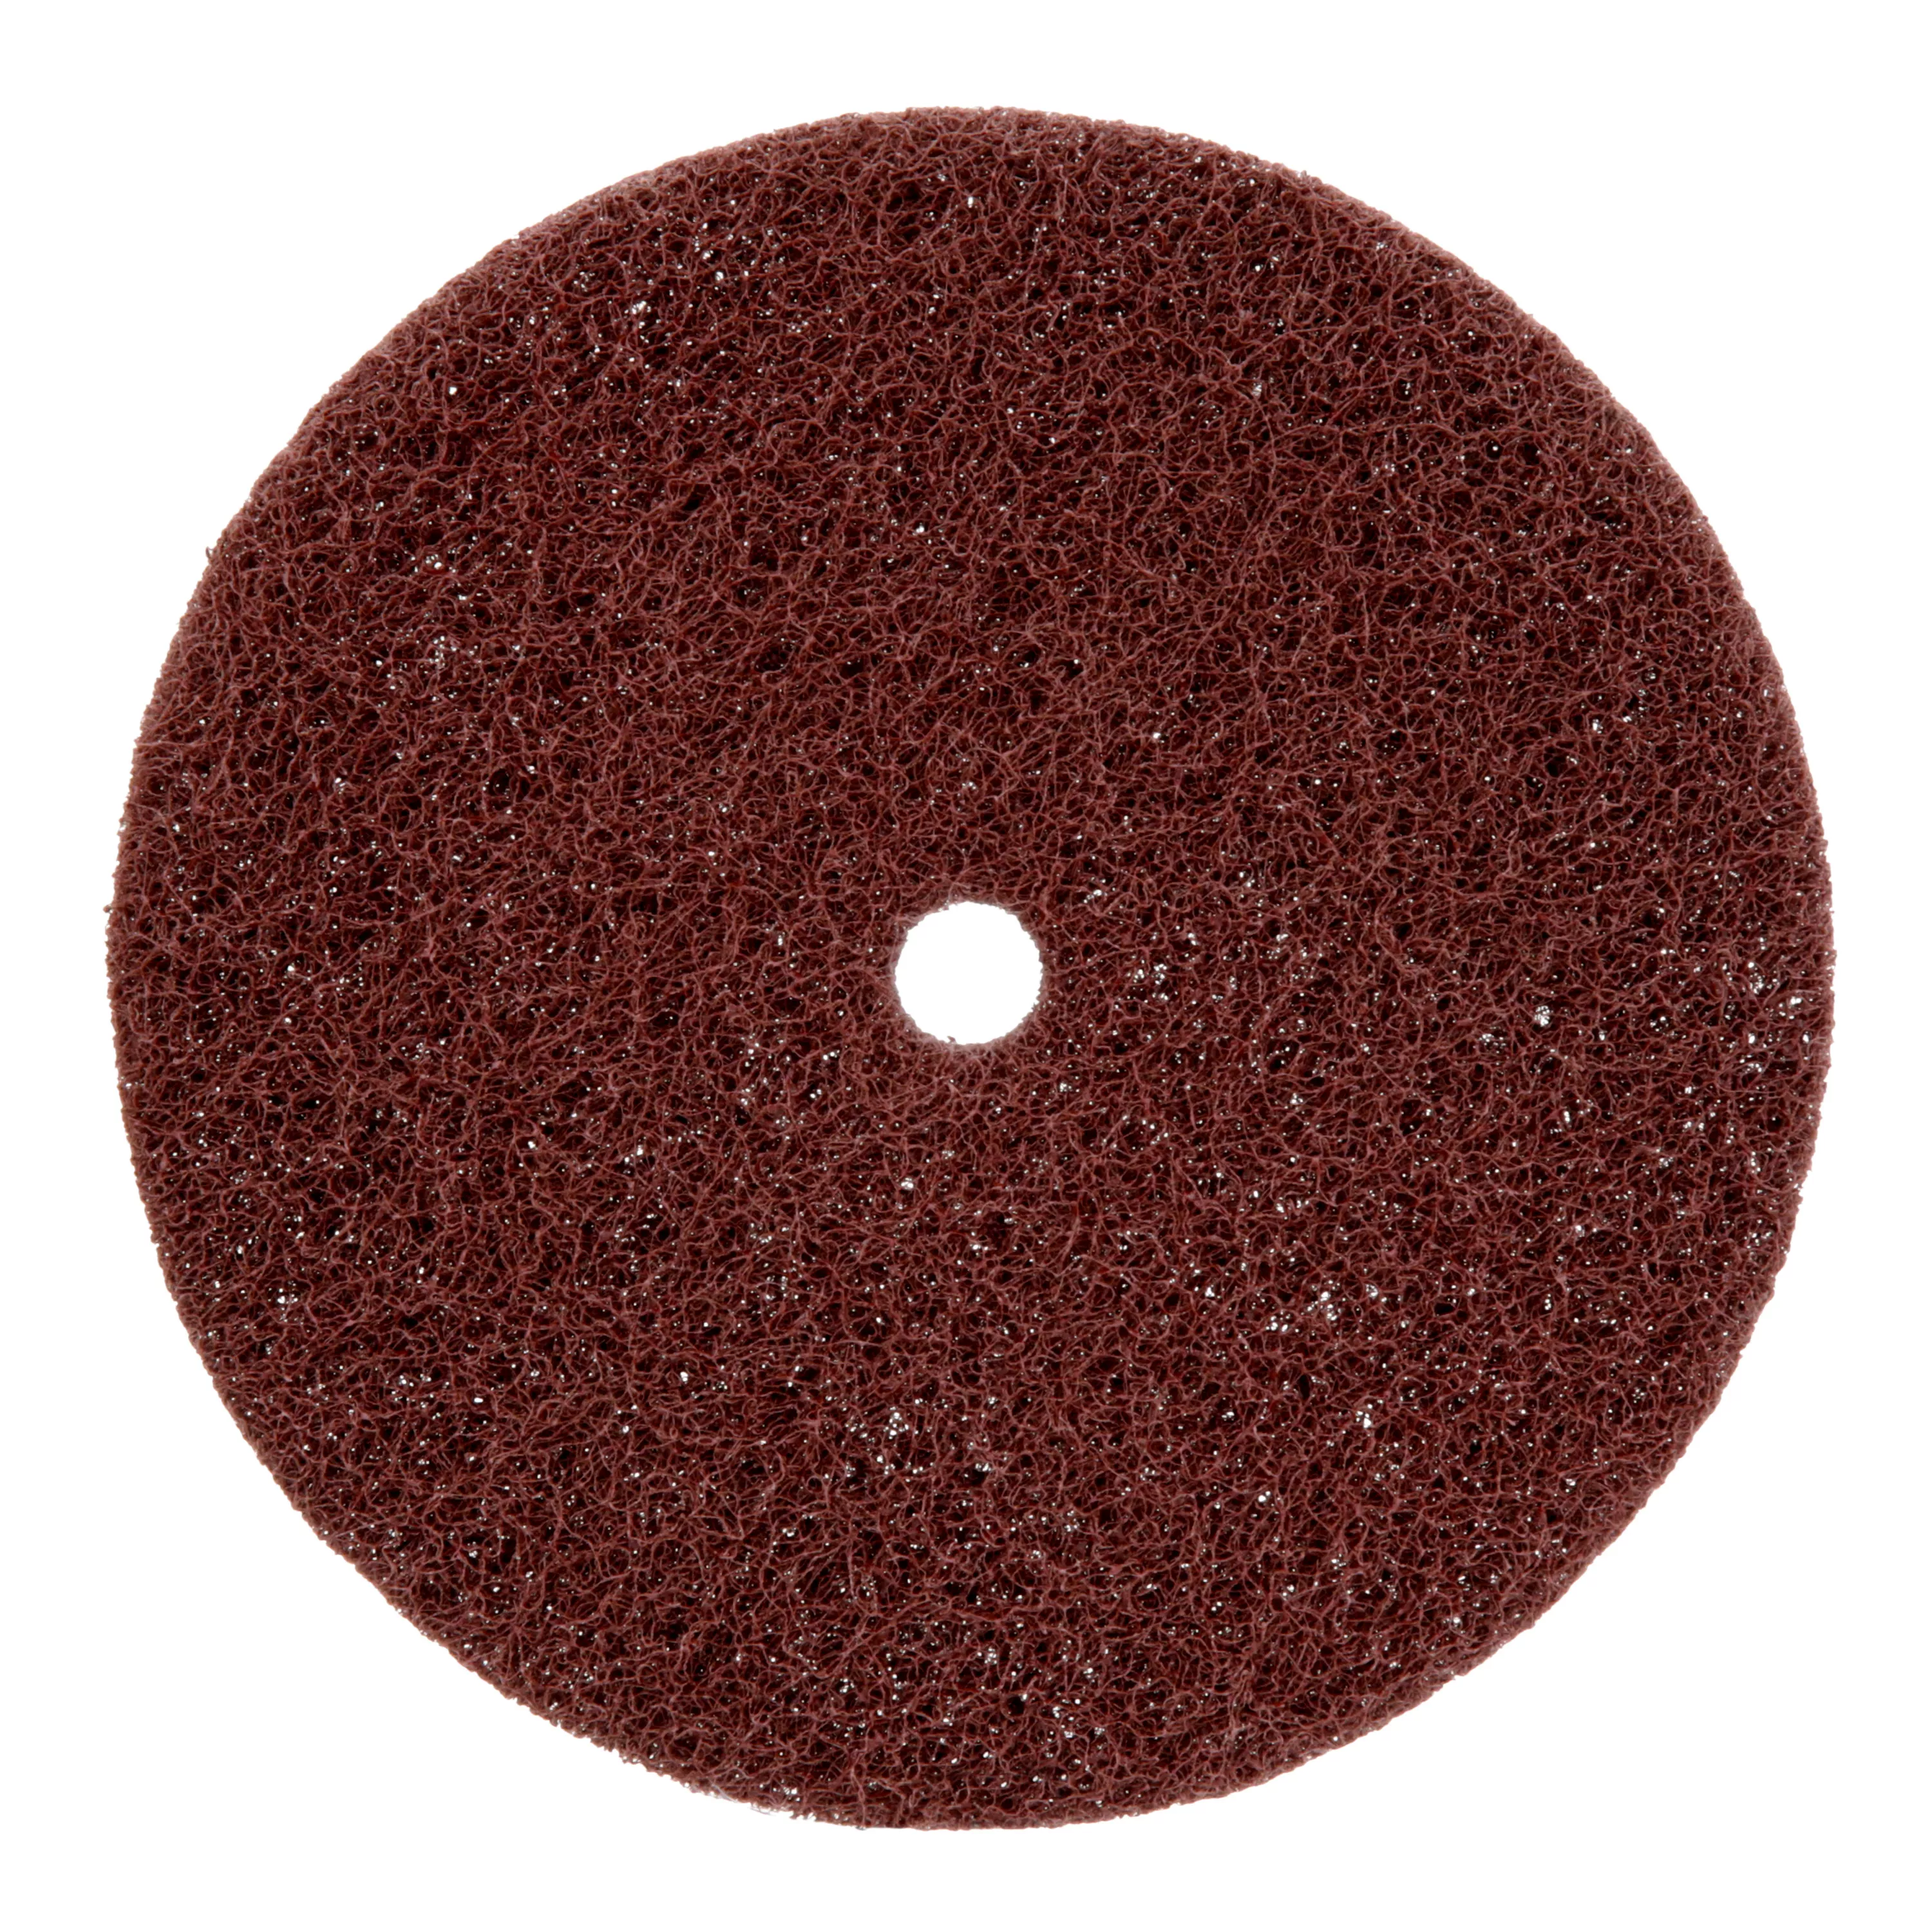 Standard Abrasives™ Buff and Blend GP Disc, 840710, 6 in x 1/2 in A MED,
10/Pac, 100 ea/Case